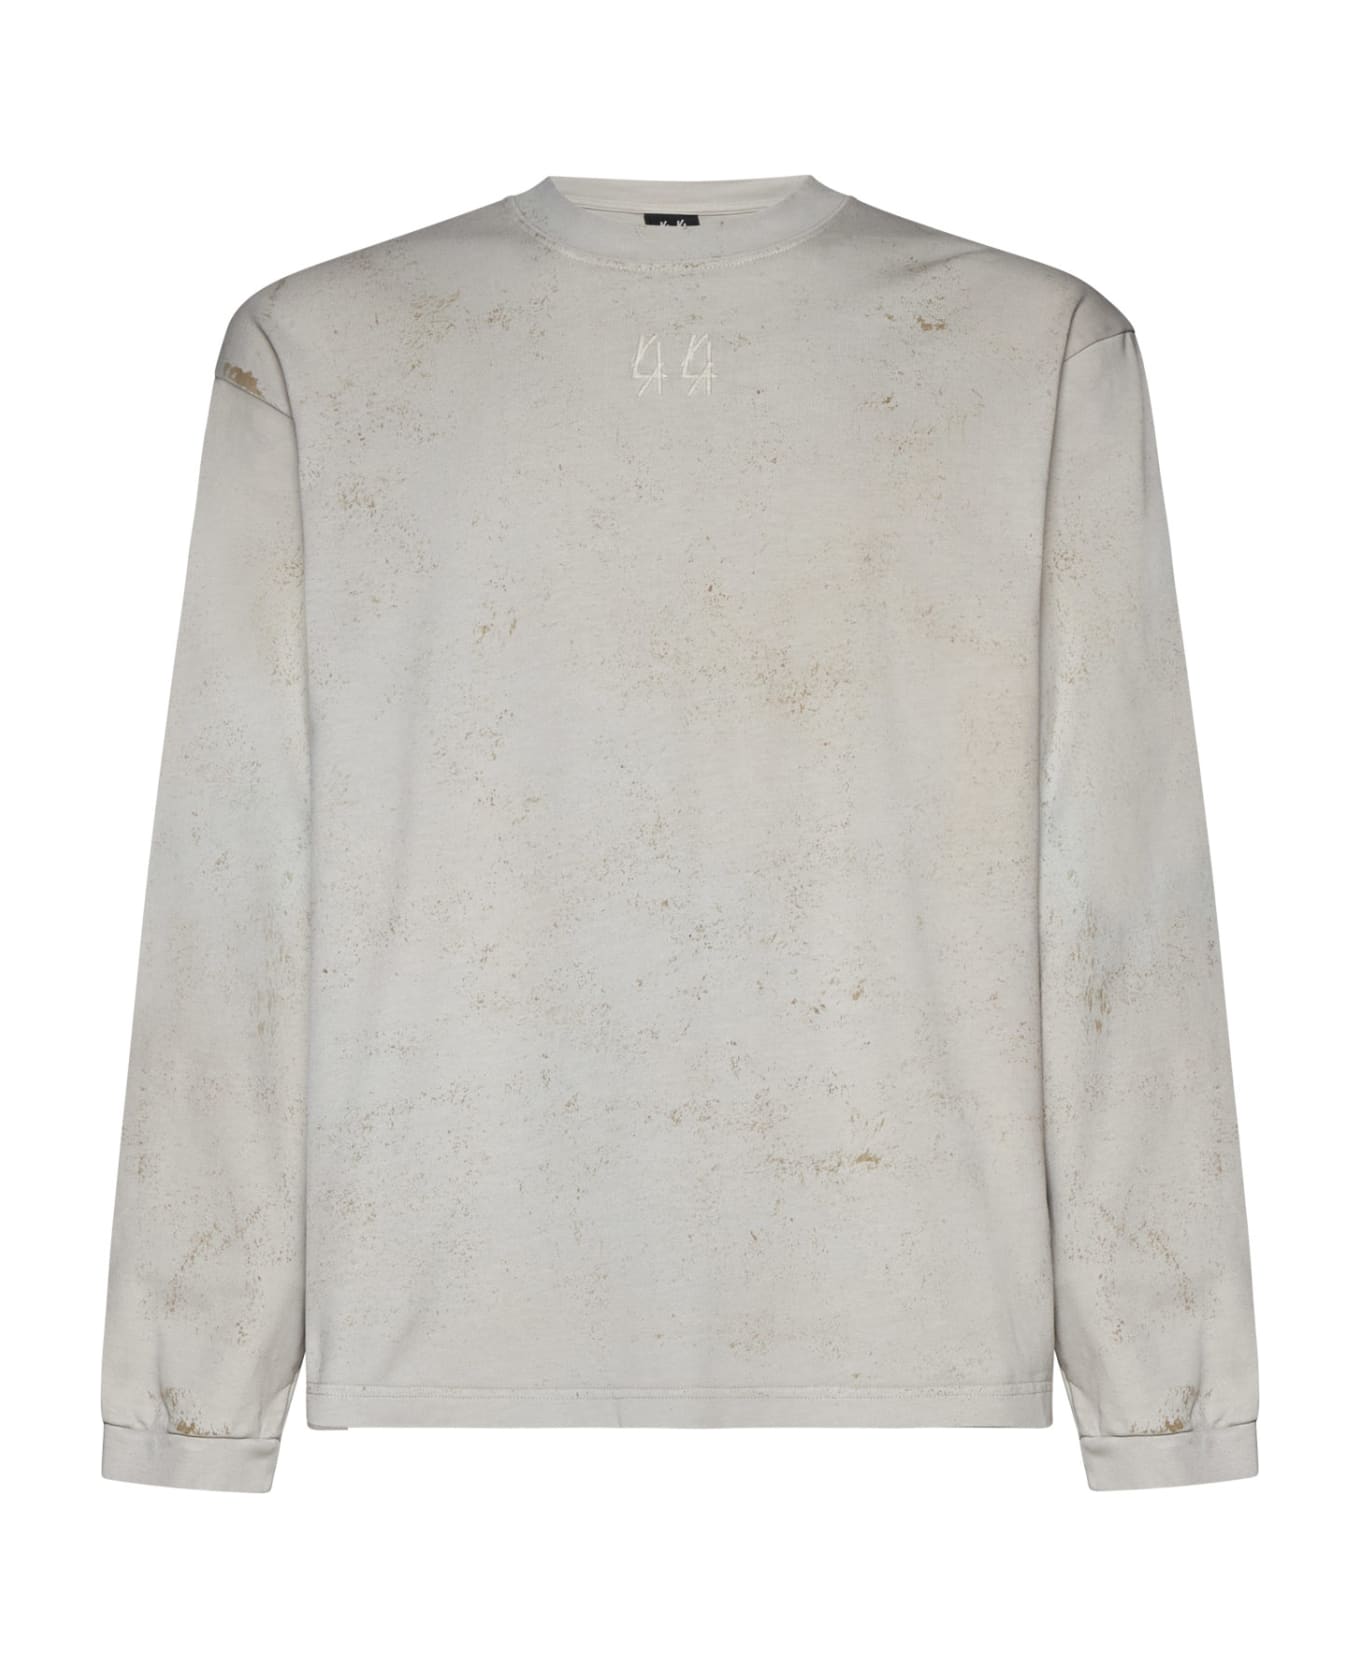 44 Label Group Sweater - Dirty white+gyps ニットウェア